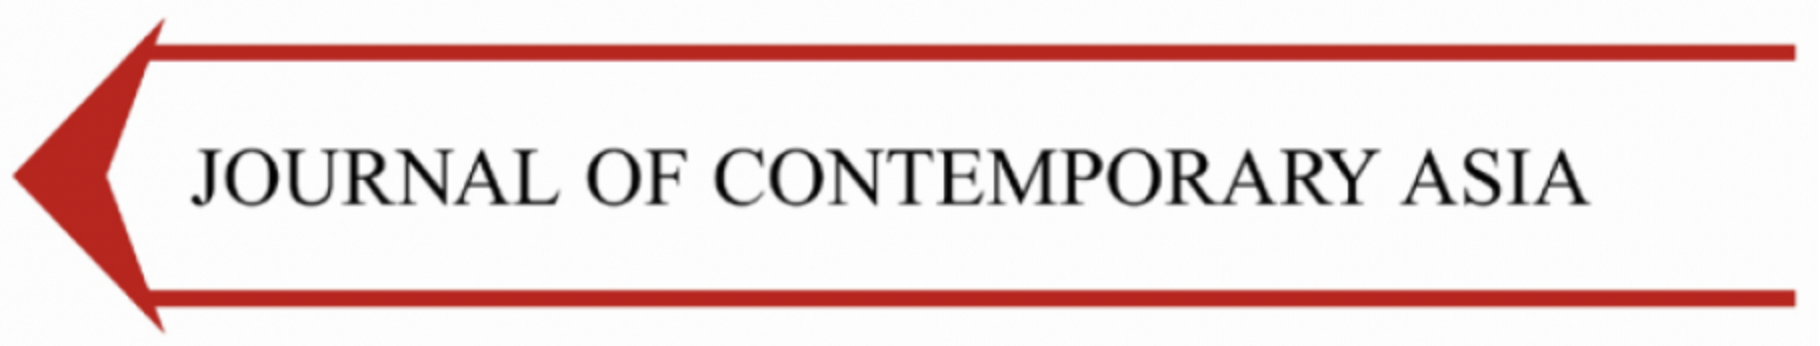 Journal of Contemporary Asia